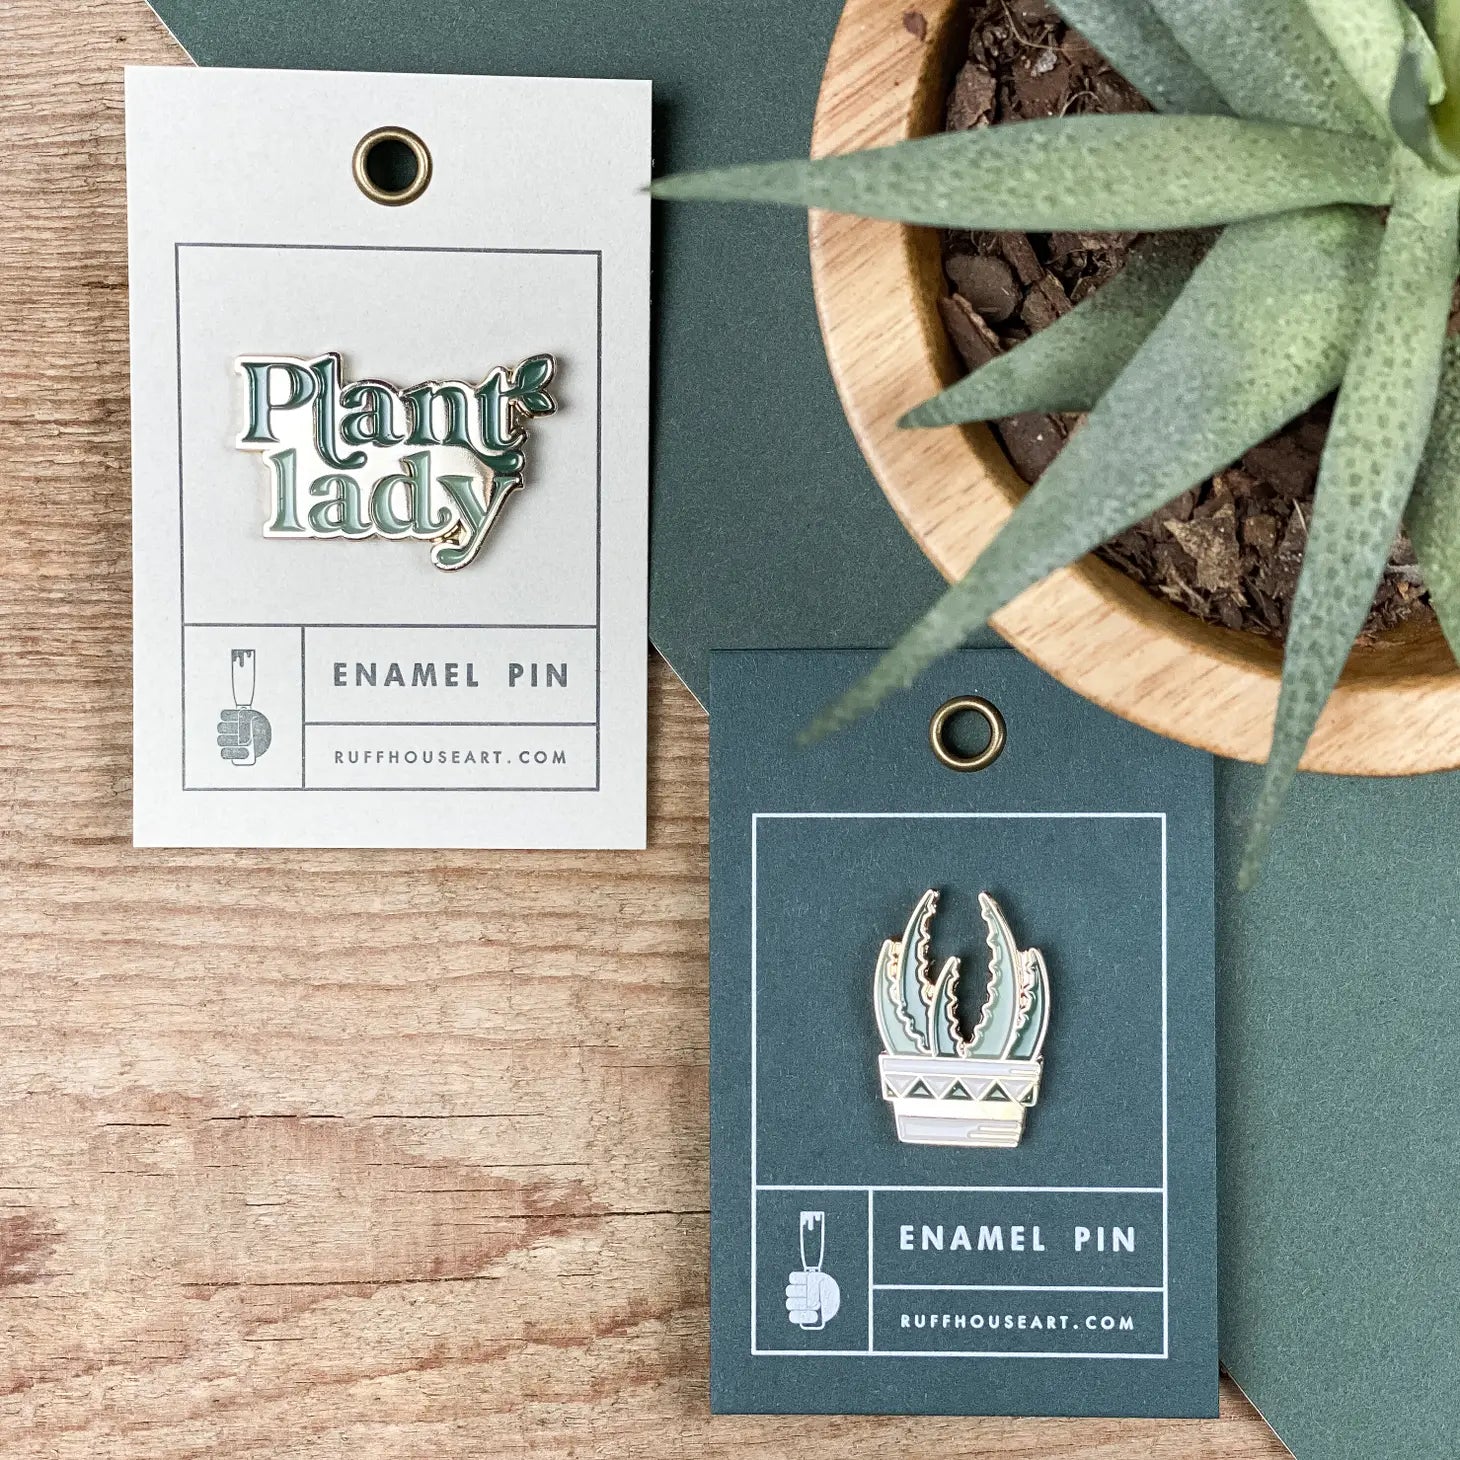 Plant Pins! Girl You Are Amazing - Crazy Plant Lady Enamel Badge Pin 